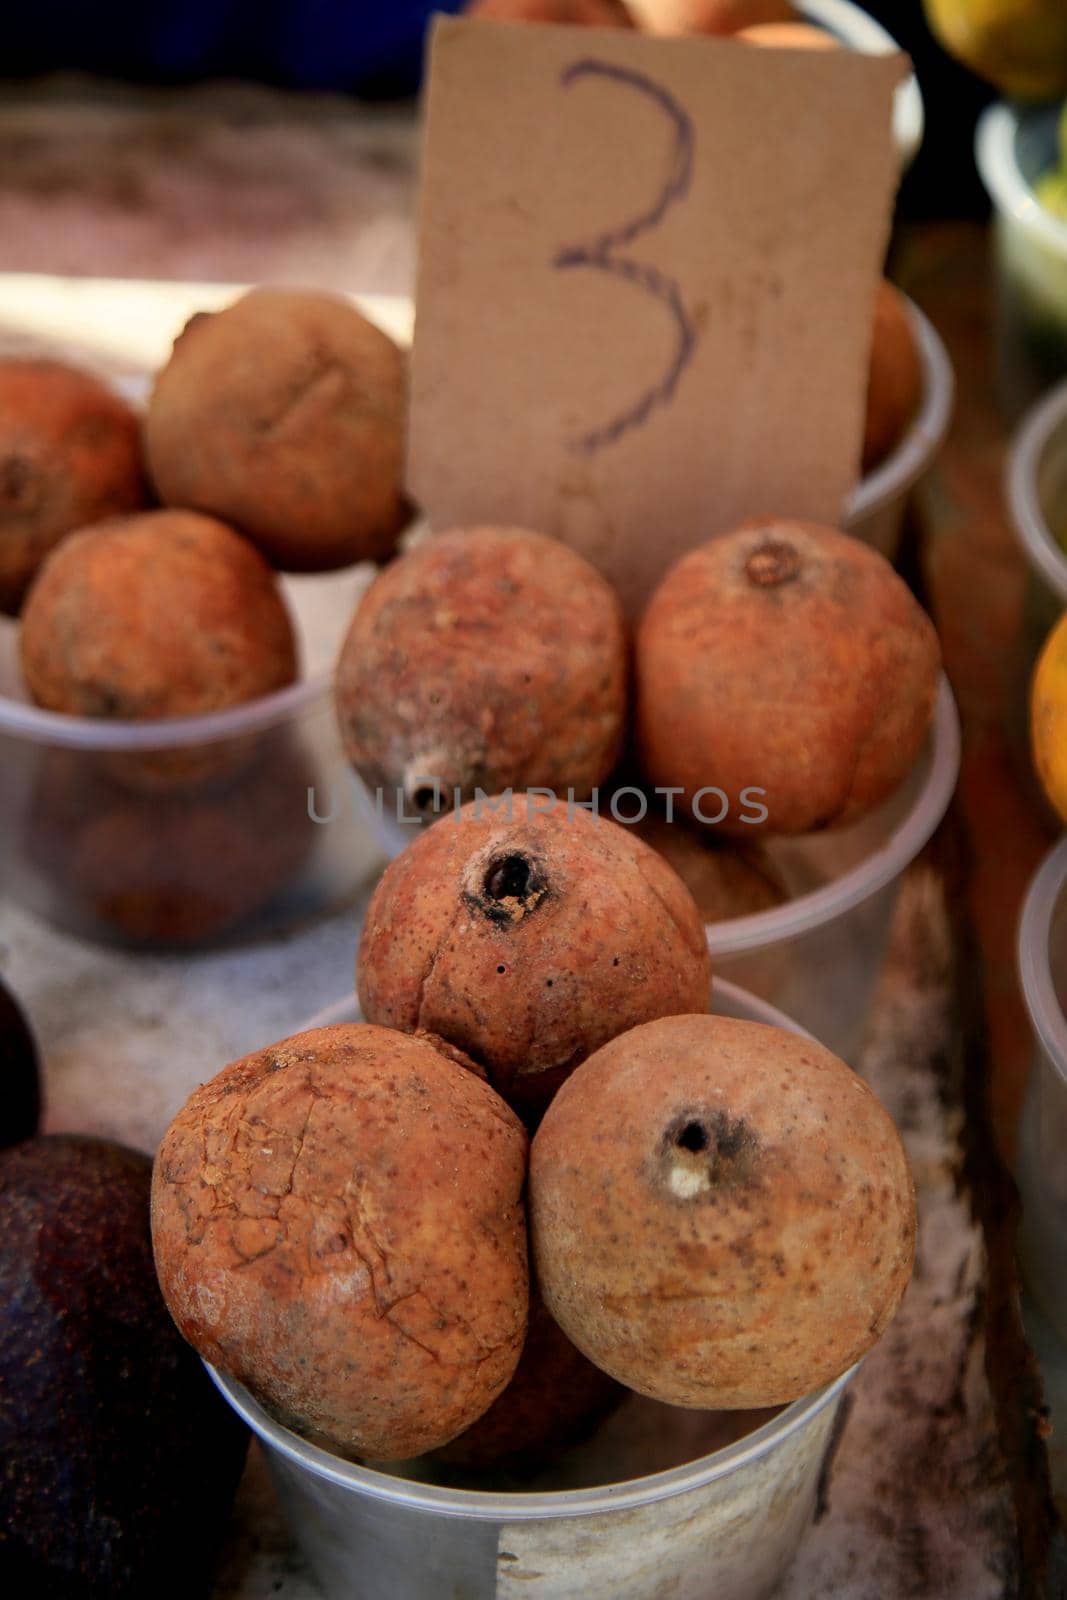 salvador, bahia, brazil - june 18, 2021: genipapo fruit is seen for sale at a free fair in the city of Salvador.